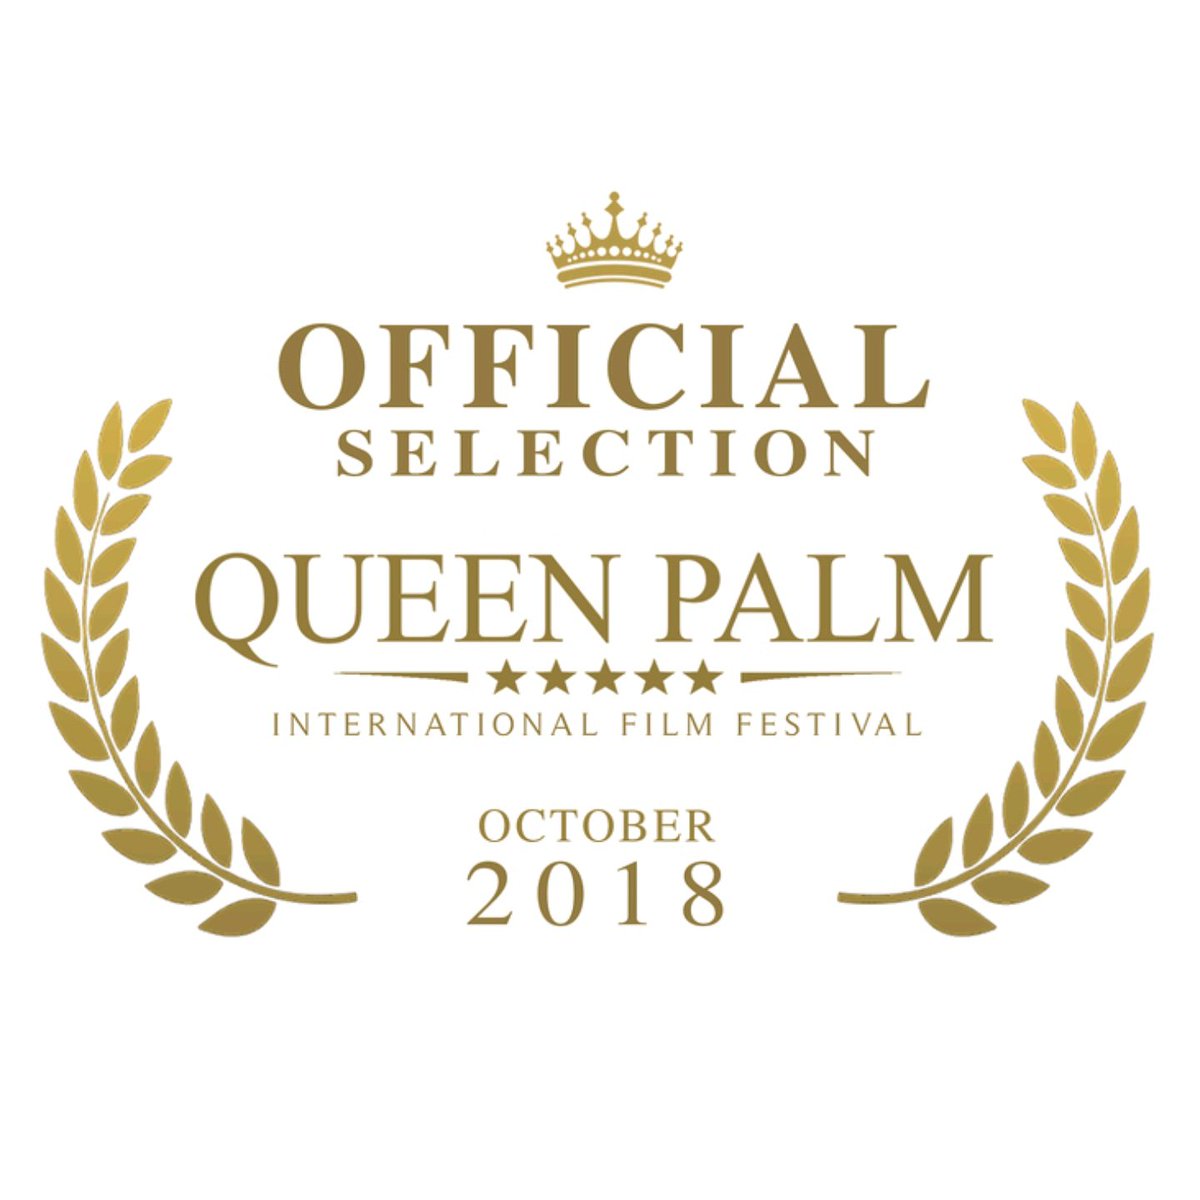 I'm thrilled to announce my matriarchal regency romance drama teleplay is an official @queenpalmfest selection!

#feministfilm #writer